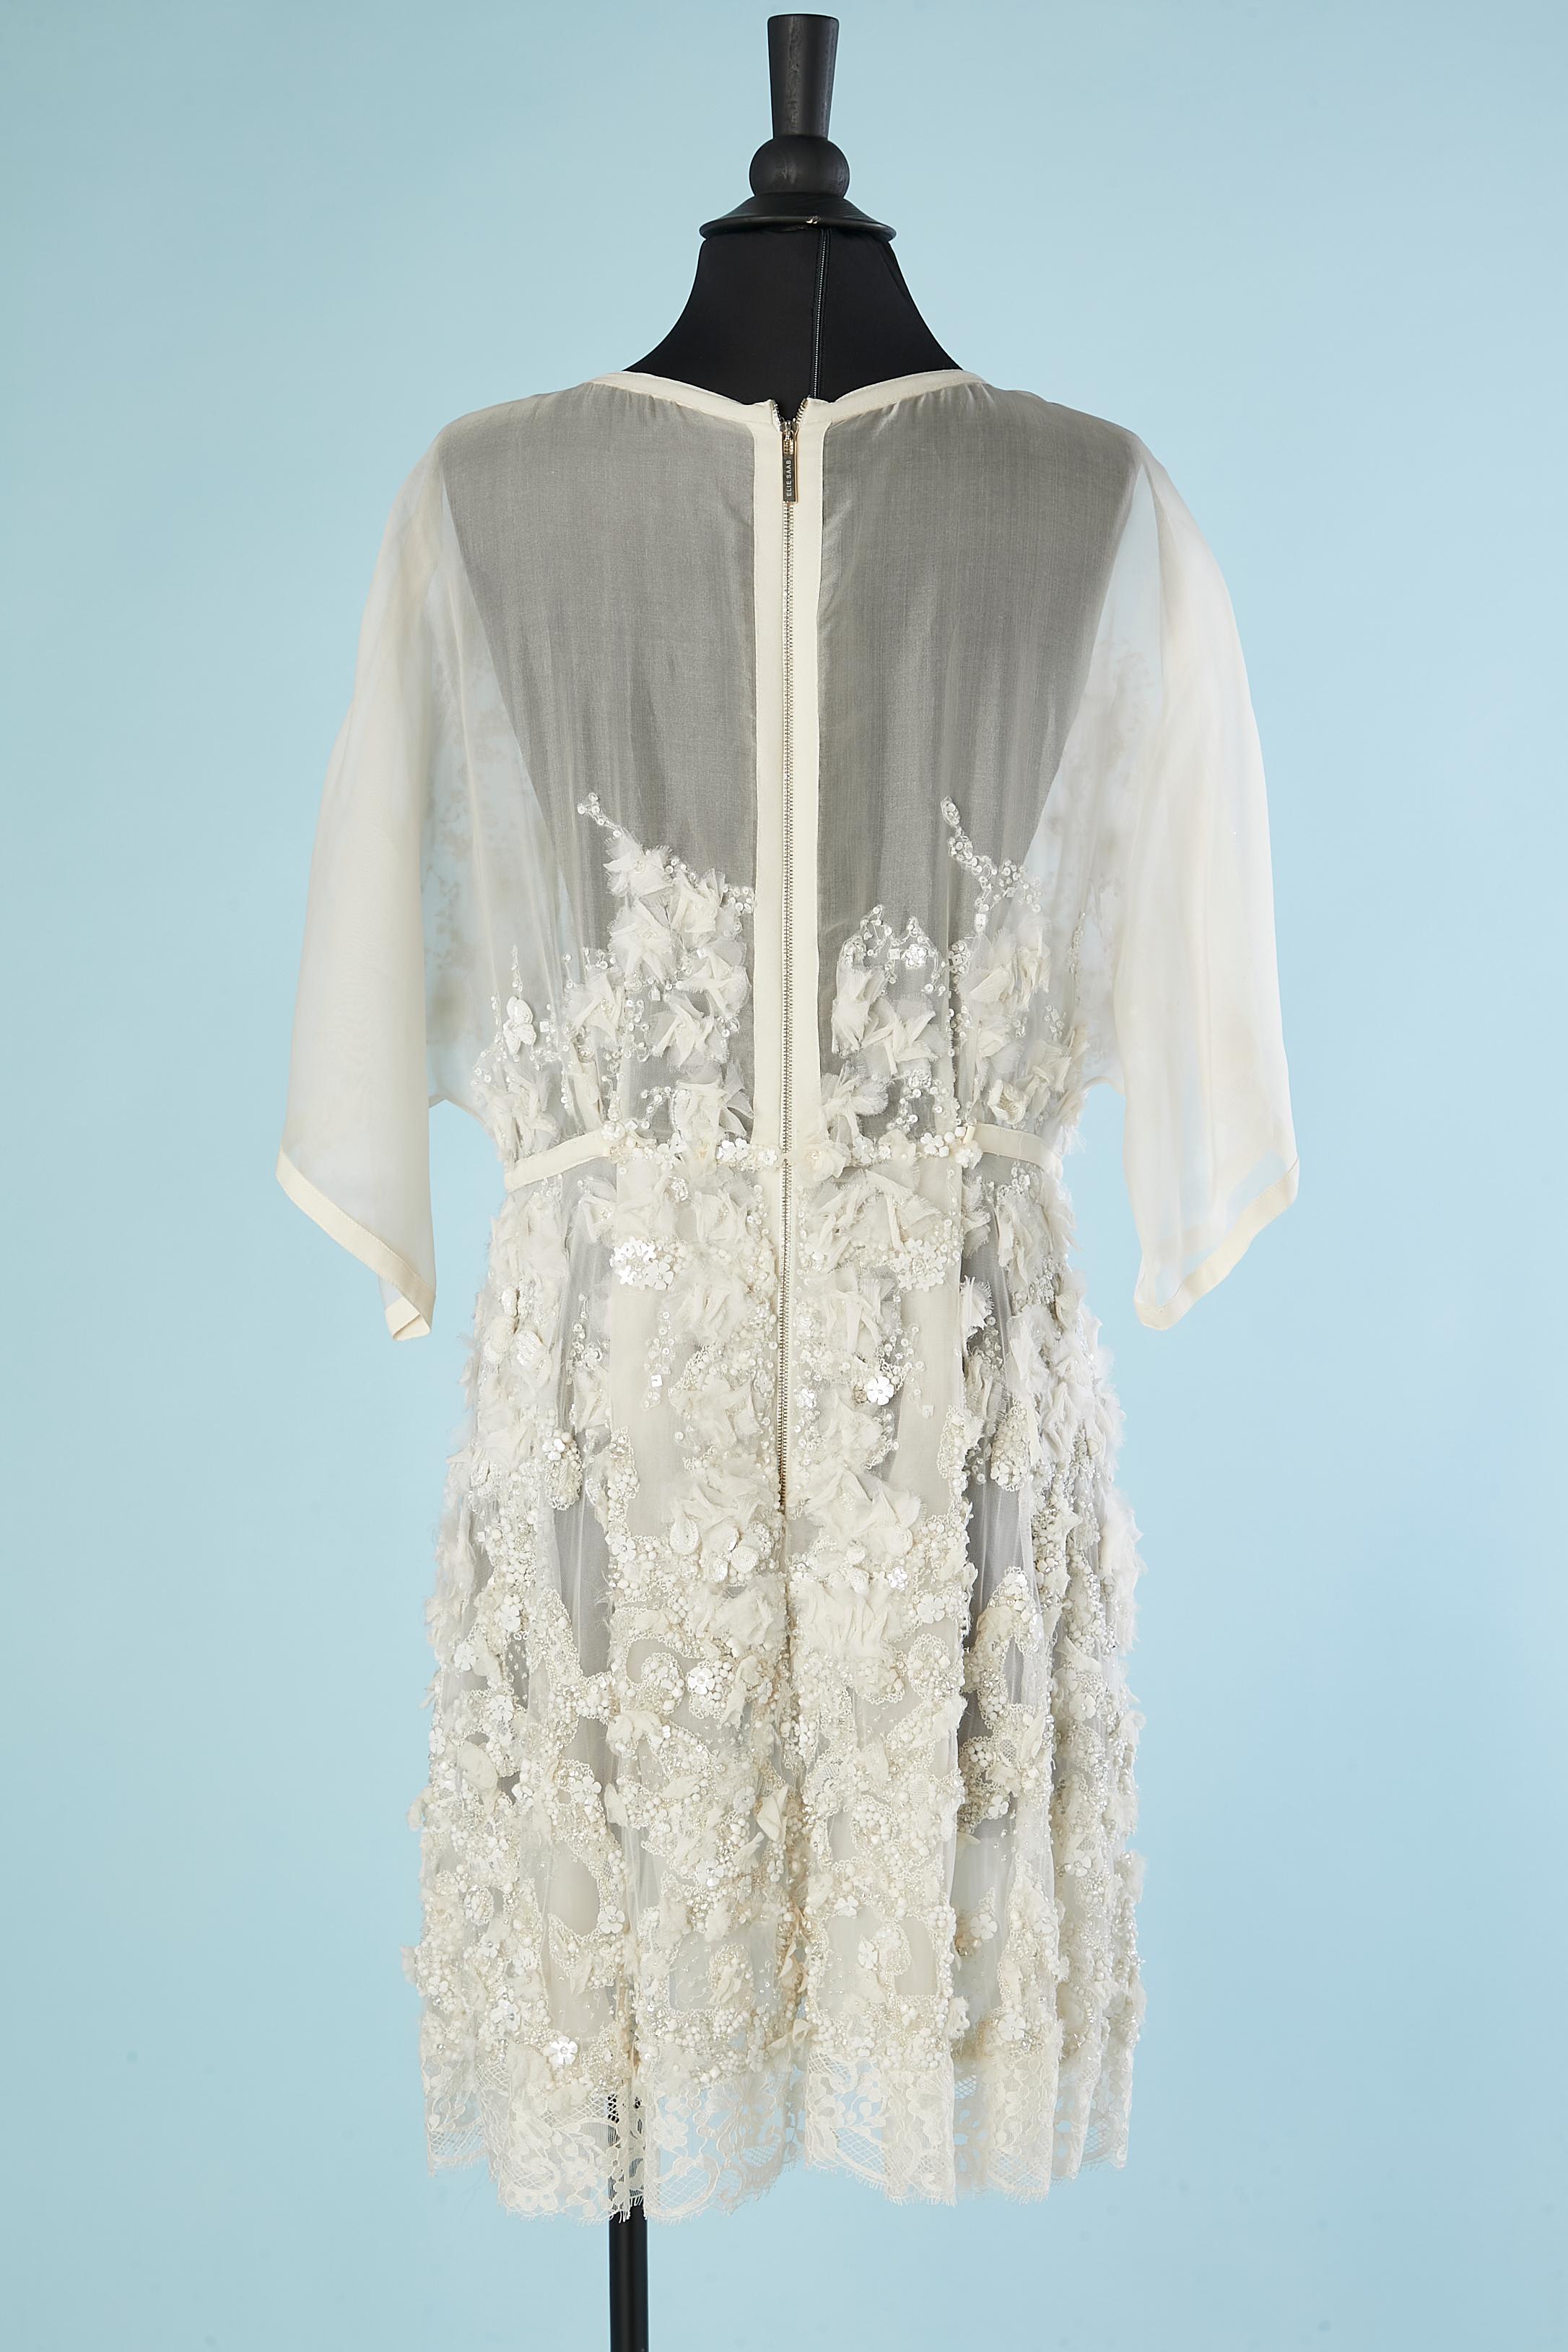 Off-white silk chiffon cocktail dress with white embroideries Elie Saab  For Sale 3